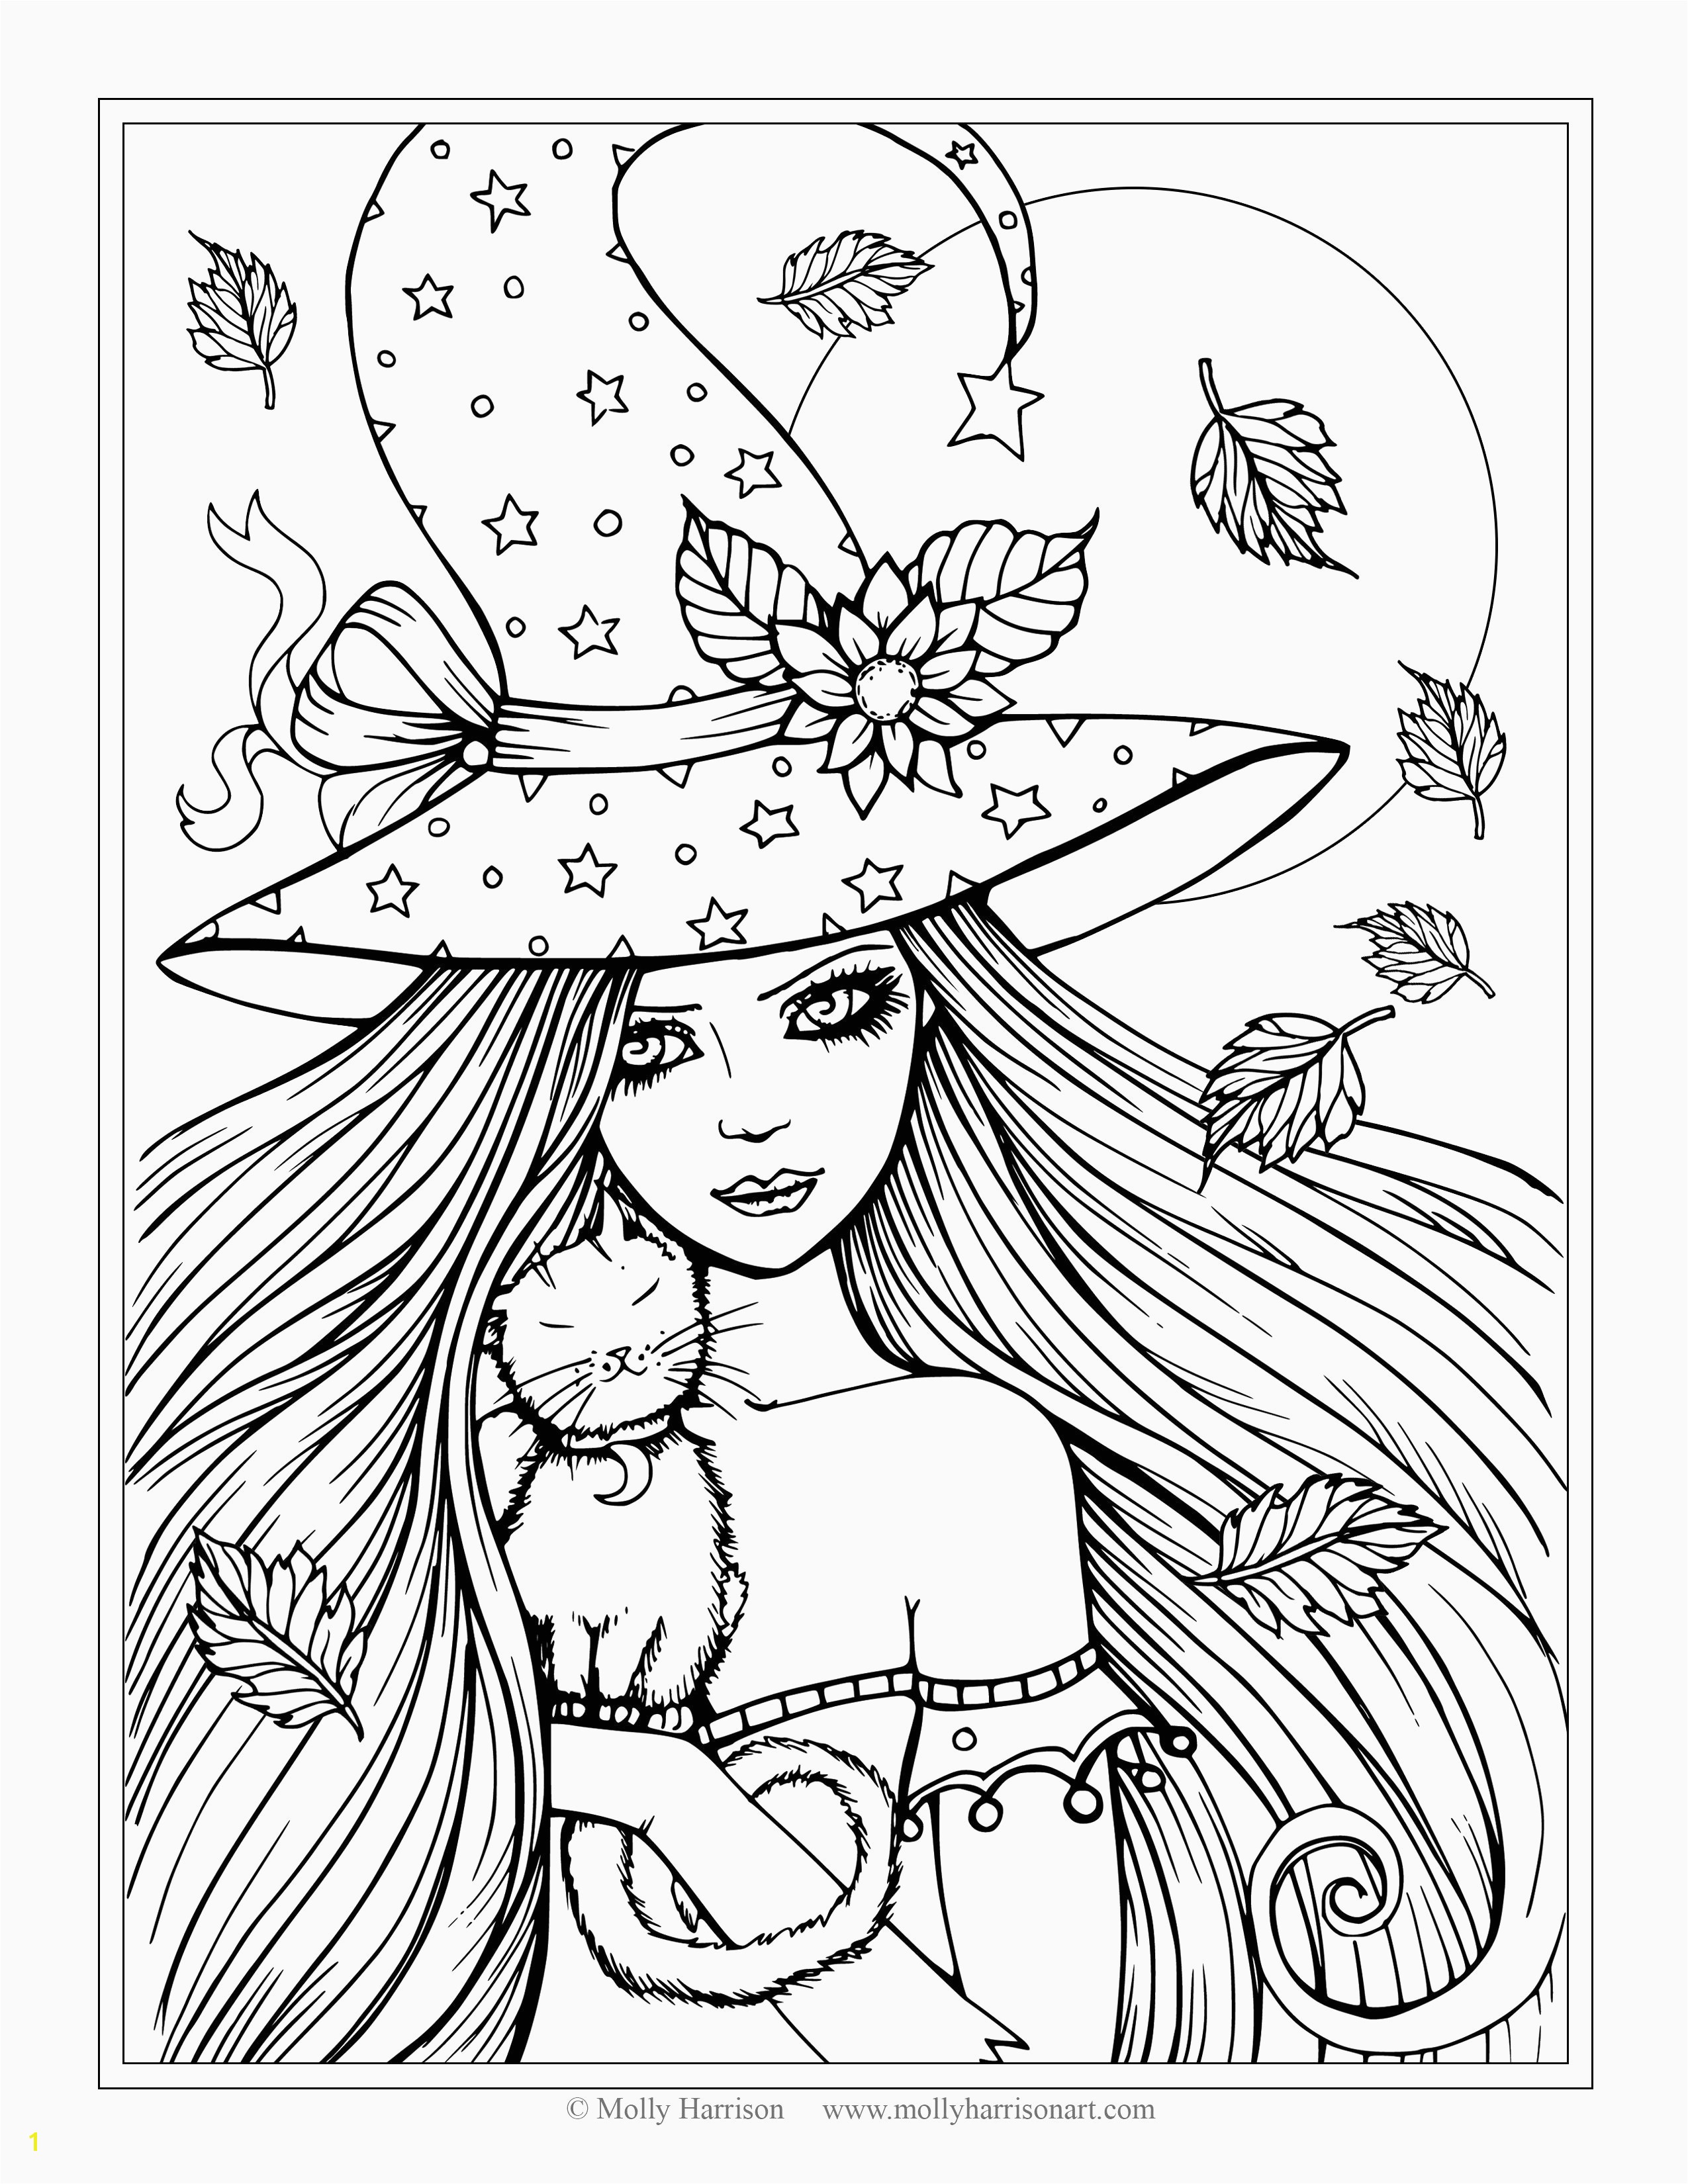 Free Kids Coloring Pages Lovely Free Coloring Pages Elegant Crayola Pages 0d Archives Se Telefonyfo Lego Ninjago